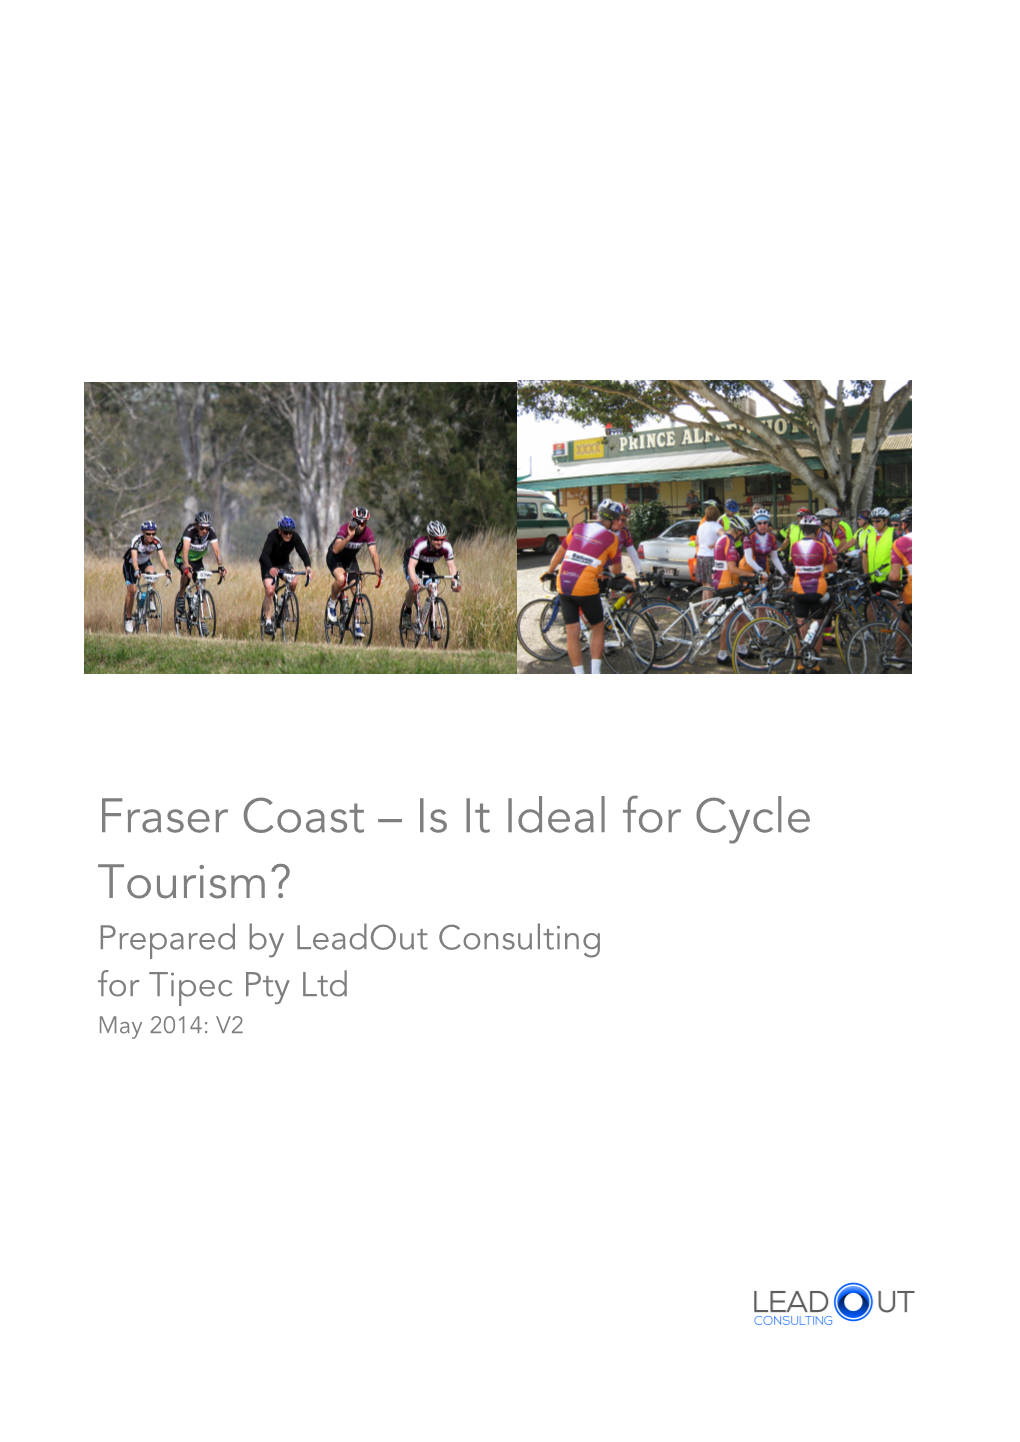 Fraser Coast – Is It Ideal for Cycle Tourism? Prepared by Leadout Consulting for Tipec Pty Ltd May 2014: V2